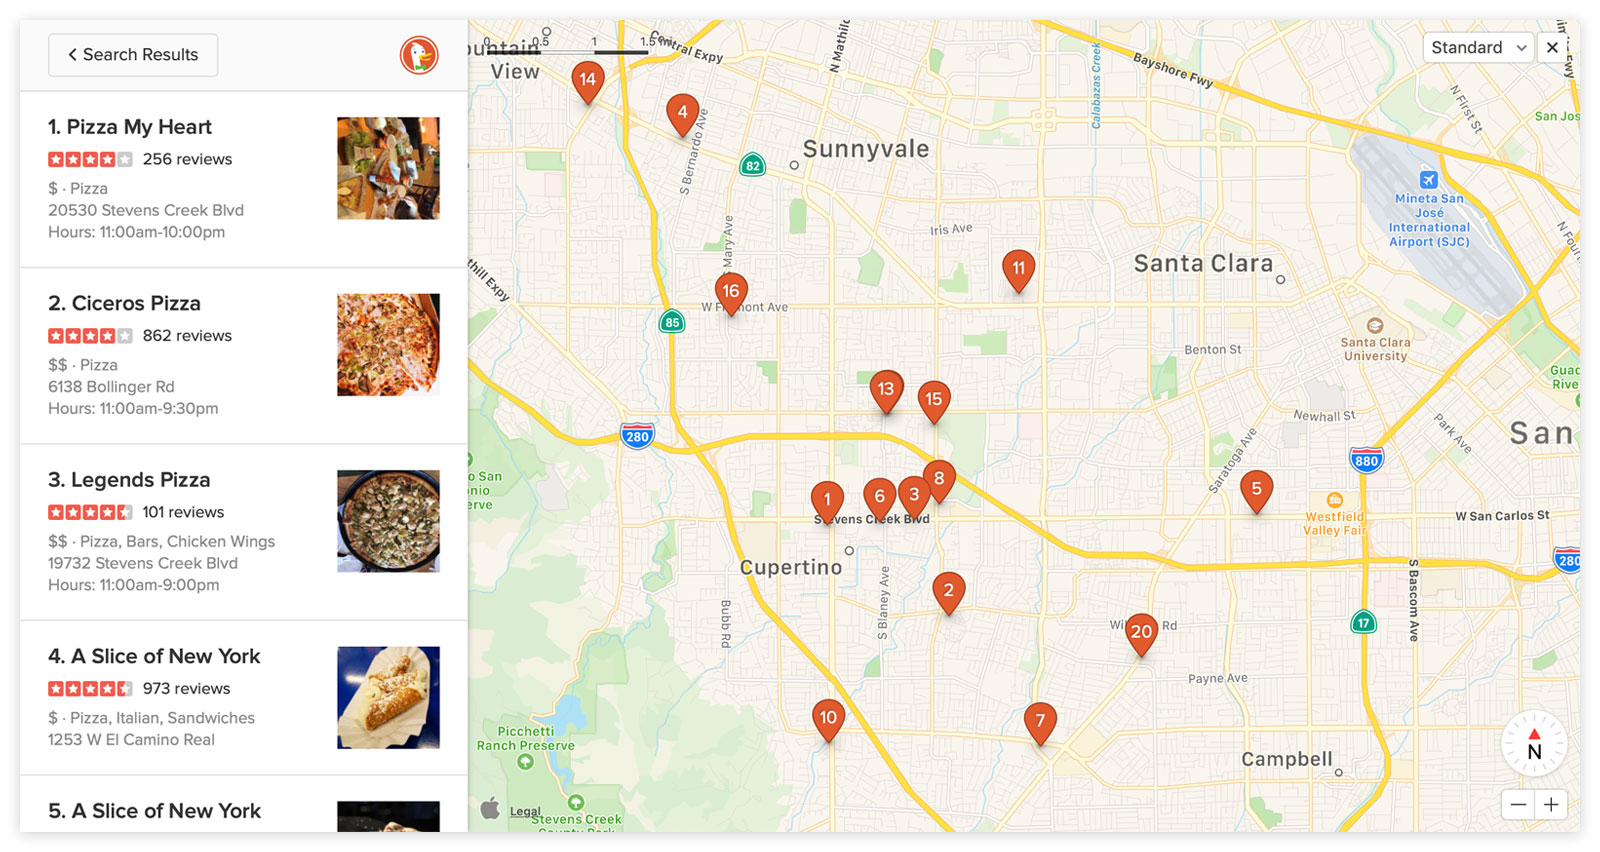 DuckDuckGo search result for pizza in cupertino, showing a fully expanded map.